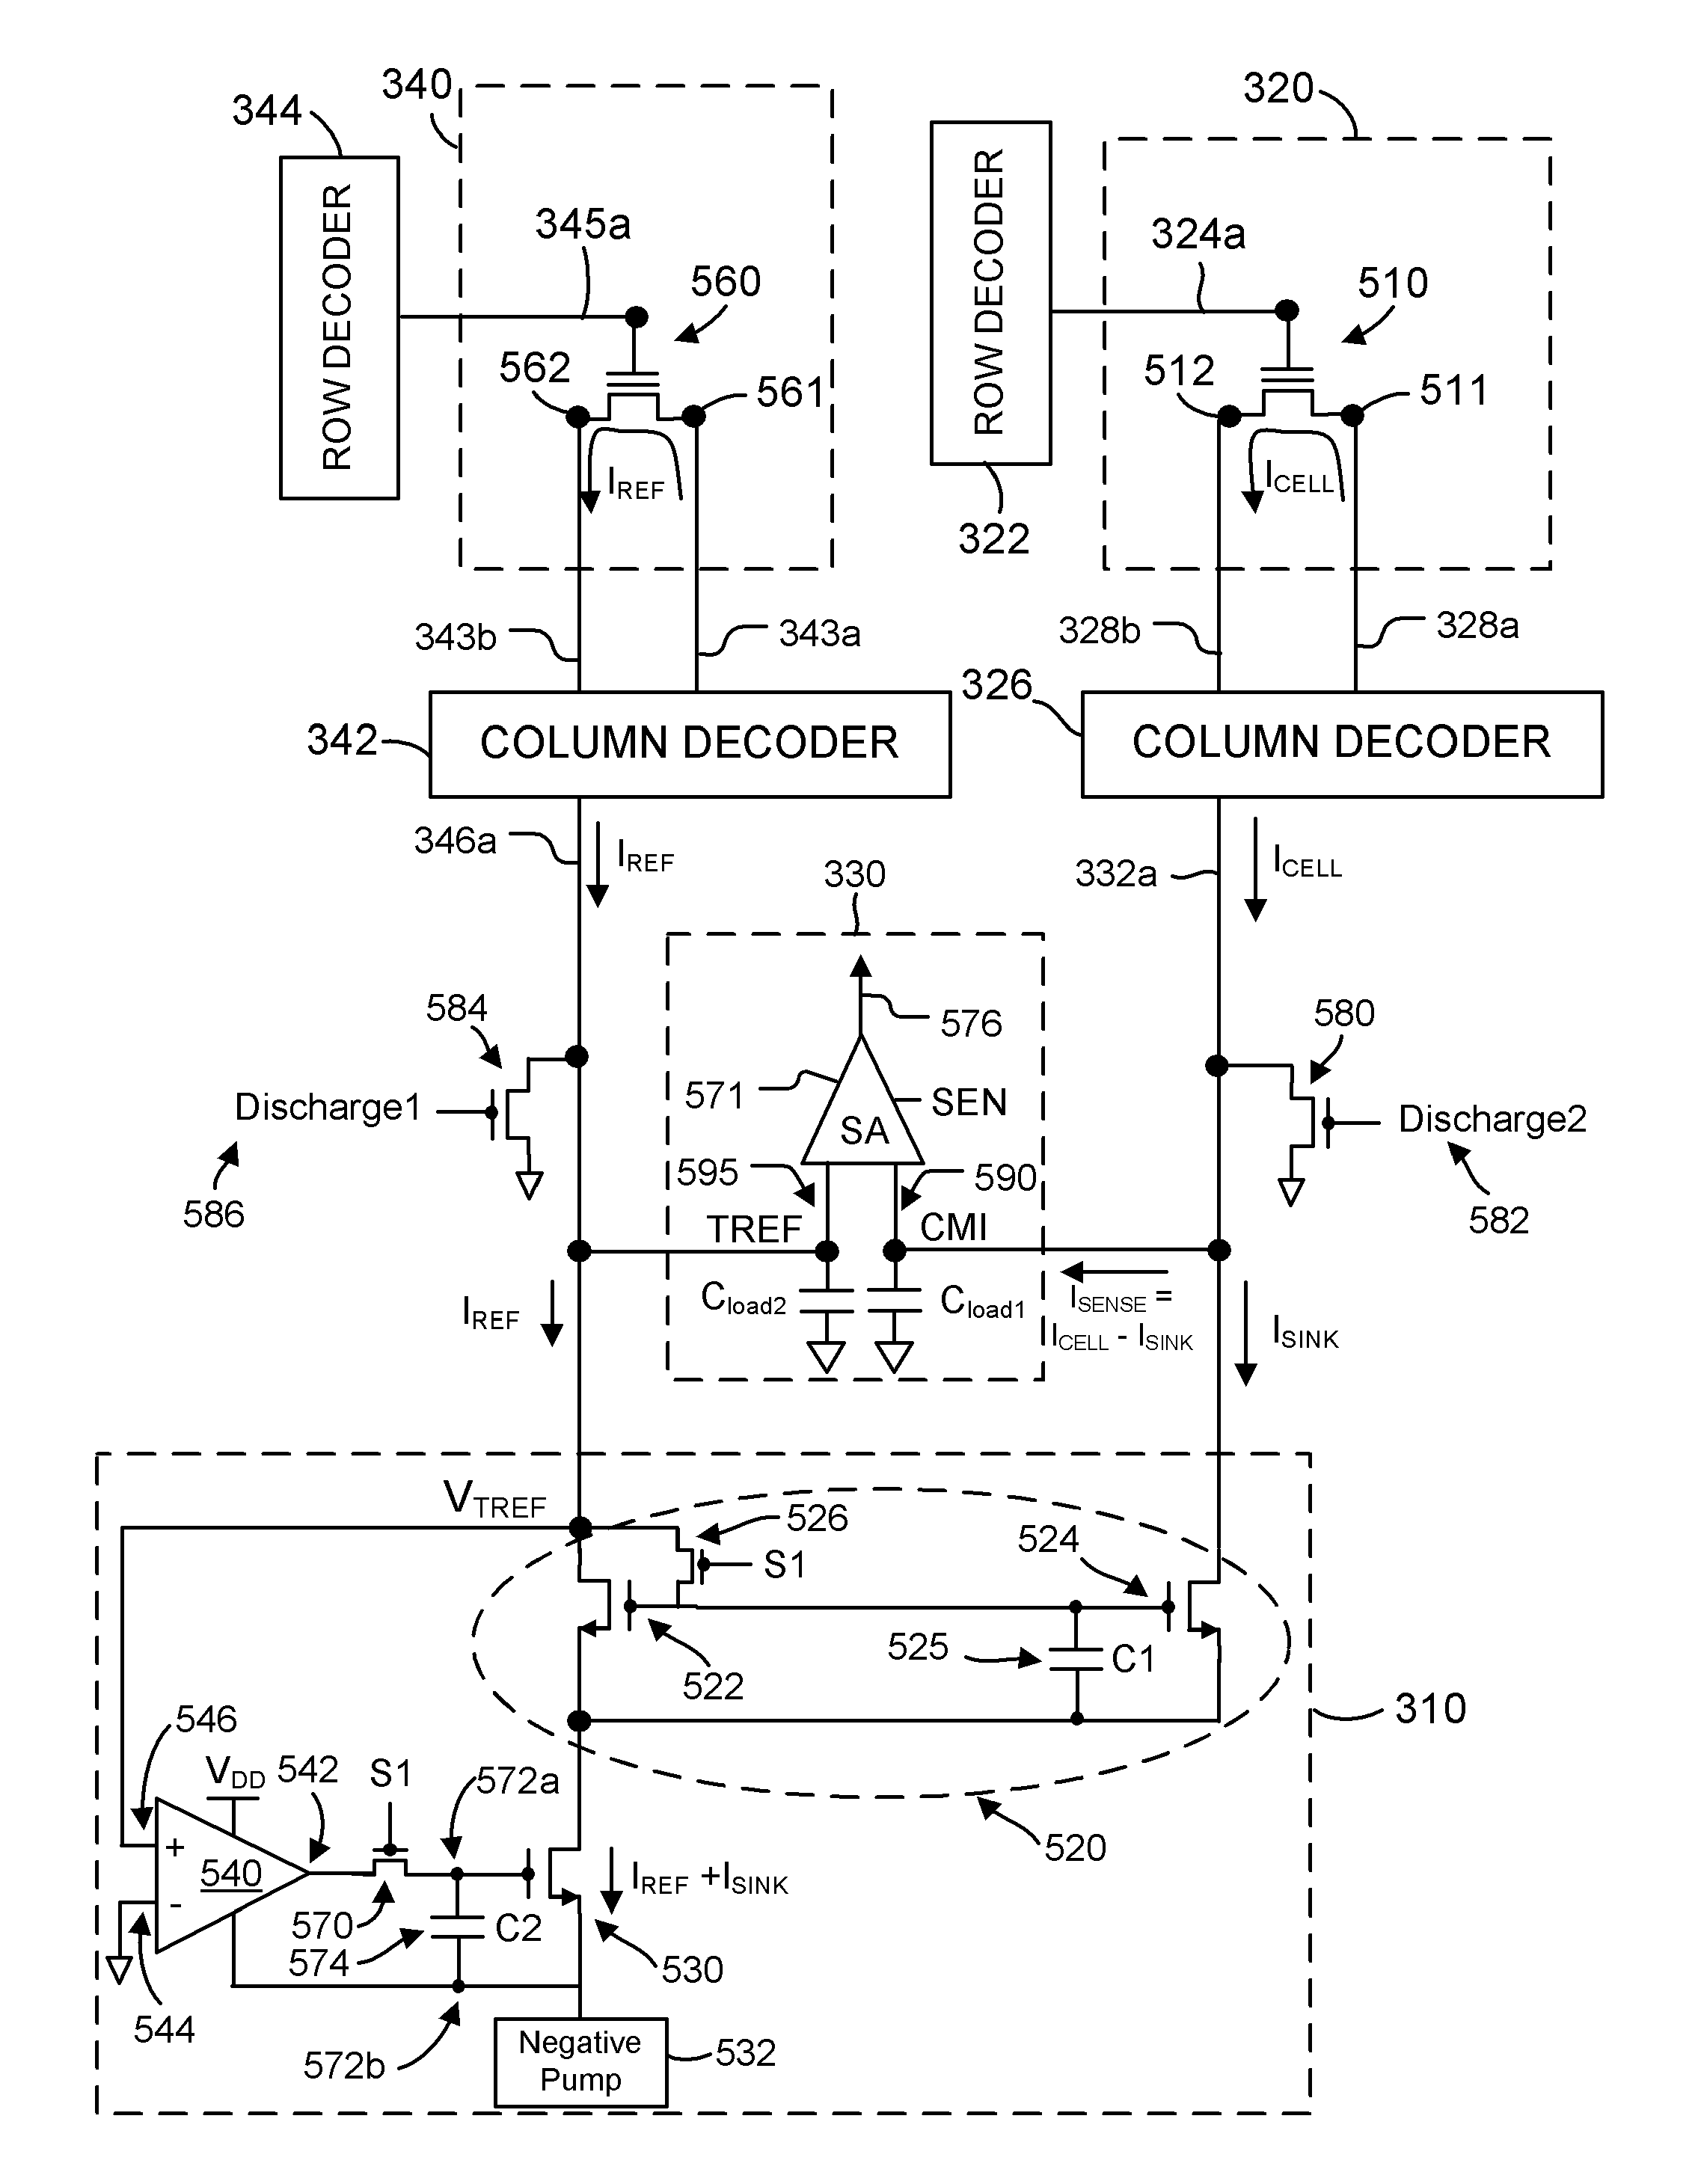 Current sink system based on sample and hold for source side sensing